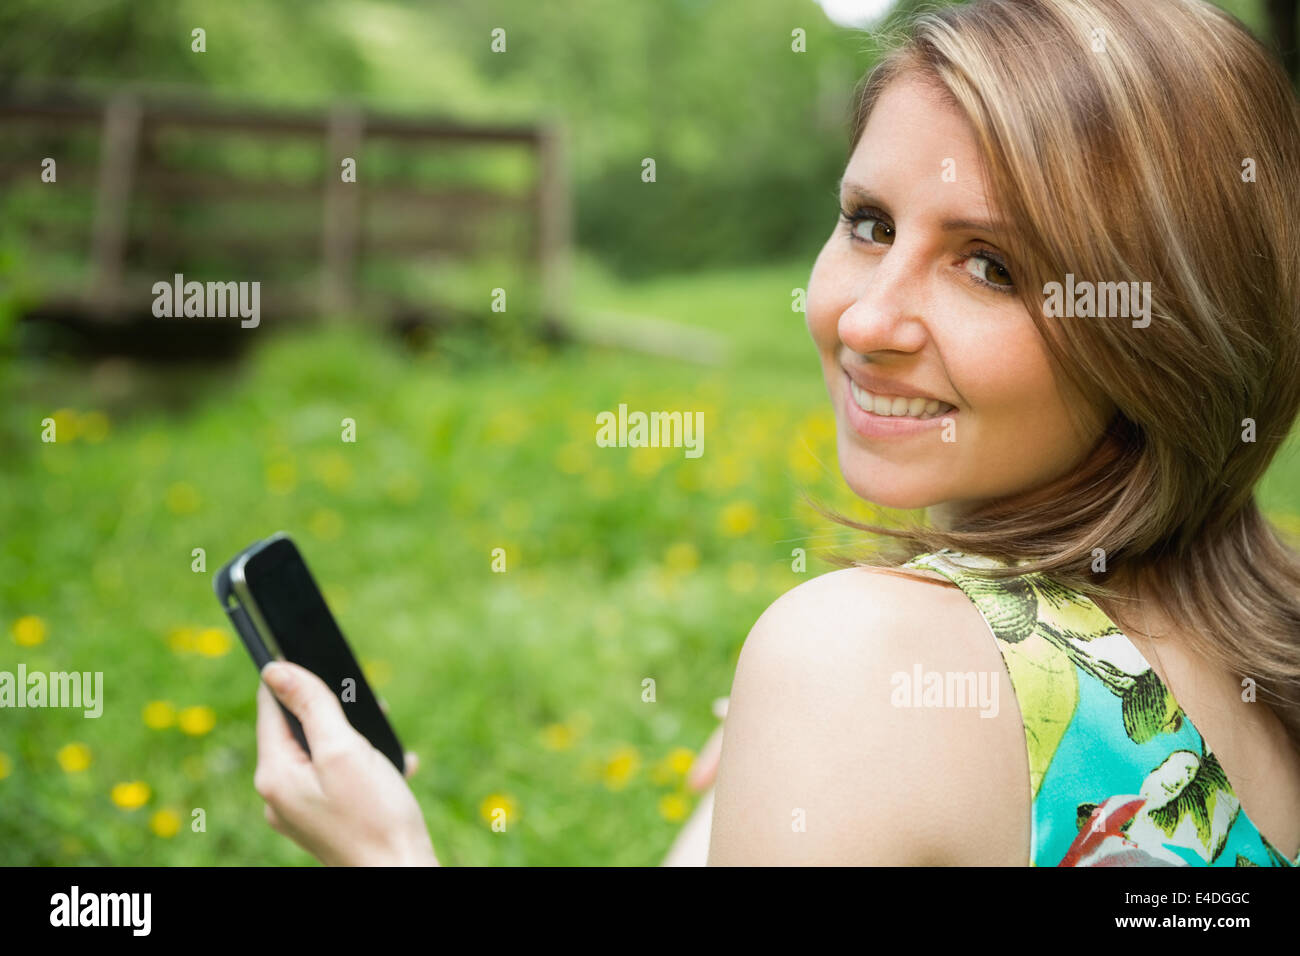 Smiling woman text messaging in field Banque D'Images